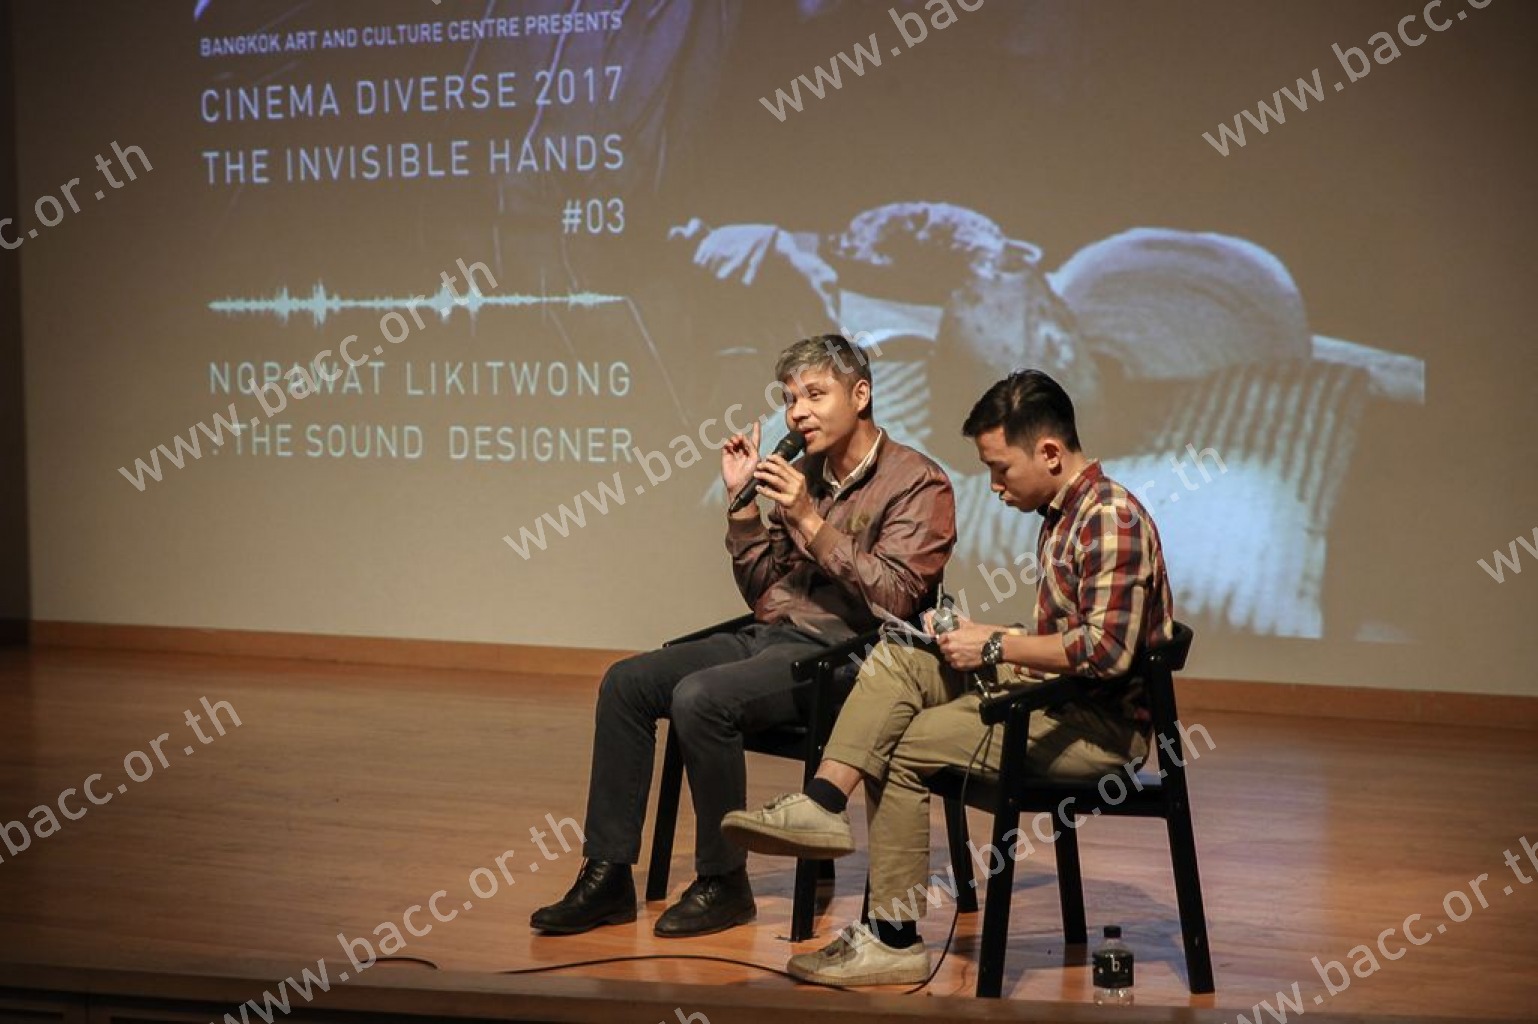 CINEMA DIVERSE 2017: The Invisible Hands 03 NOPAWAT LIKITWONG: THE SOUND DESIGNER